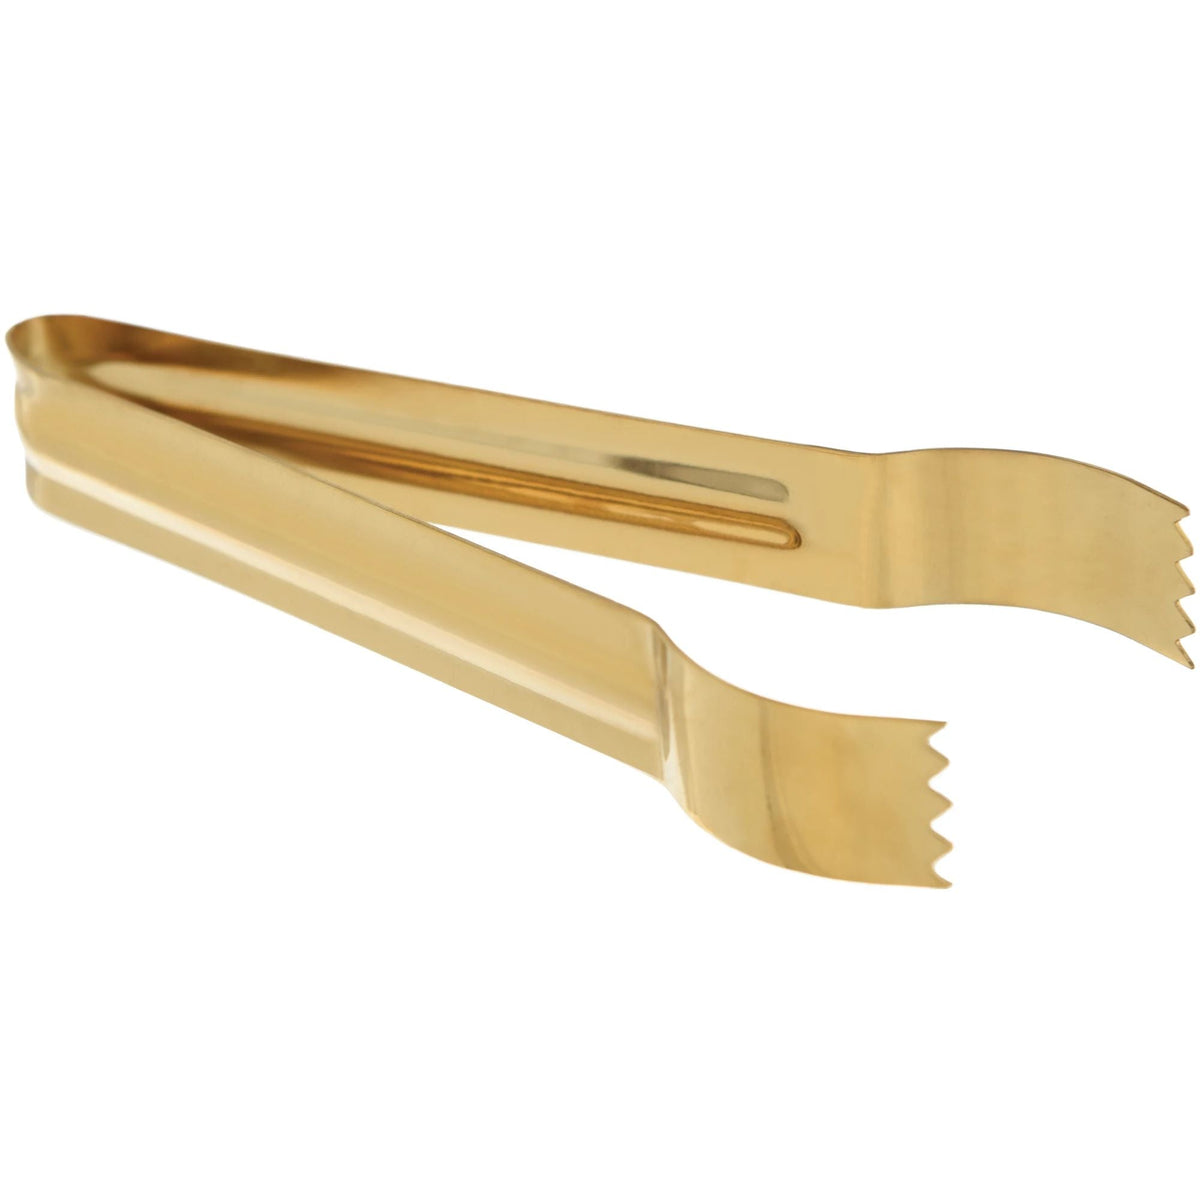 AMSCAN CA Disposable-Plasticware Gold Stainless Steel Serving Tongs, 1 Count